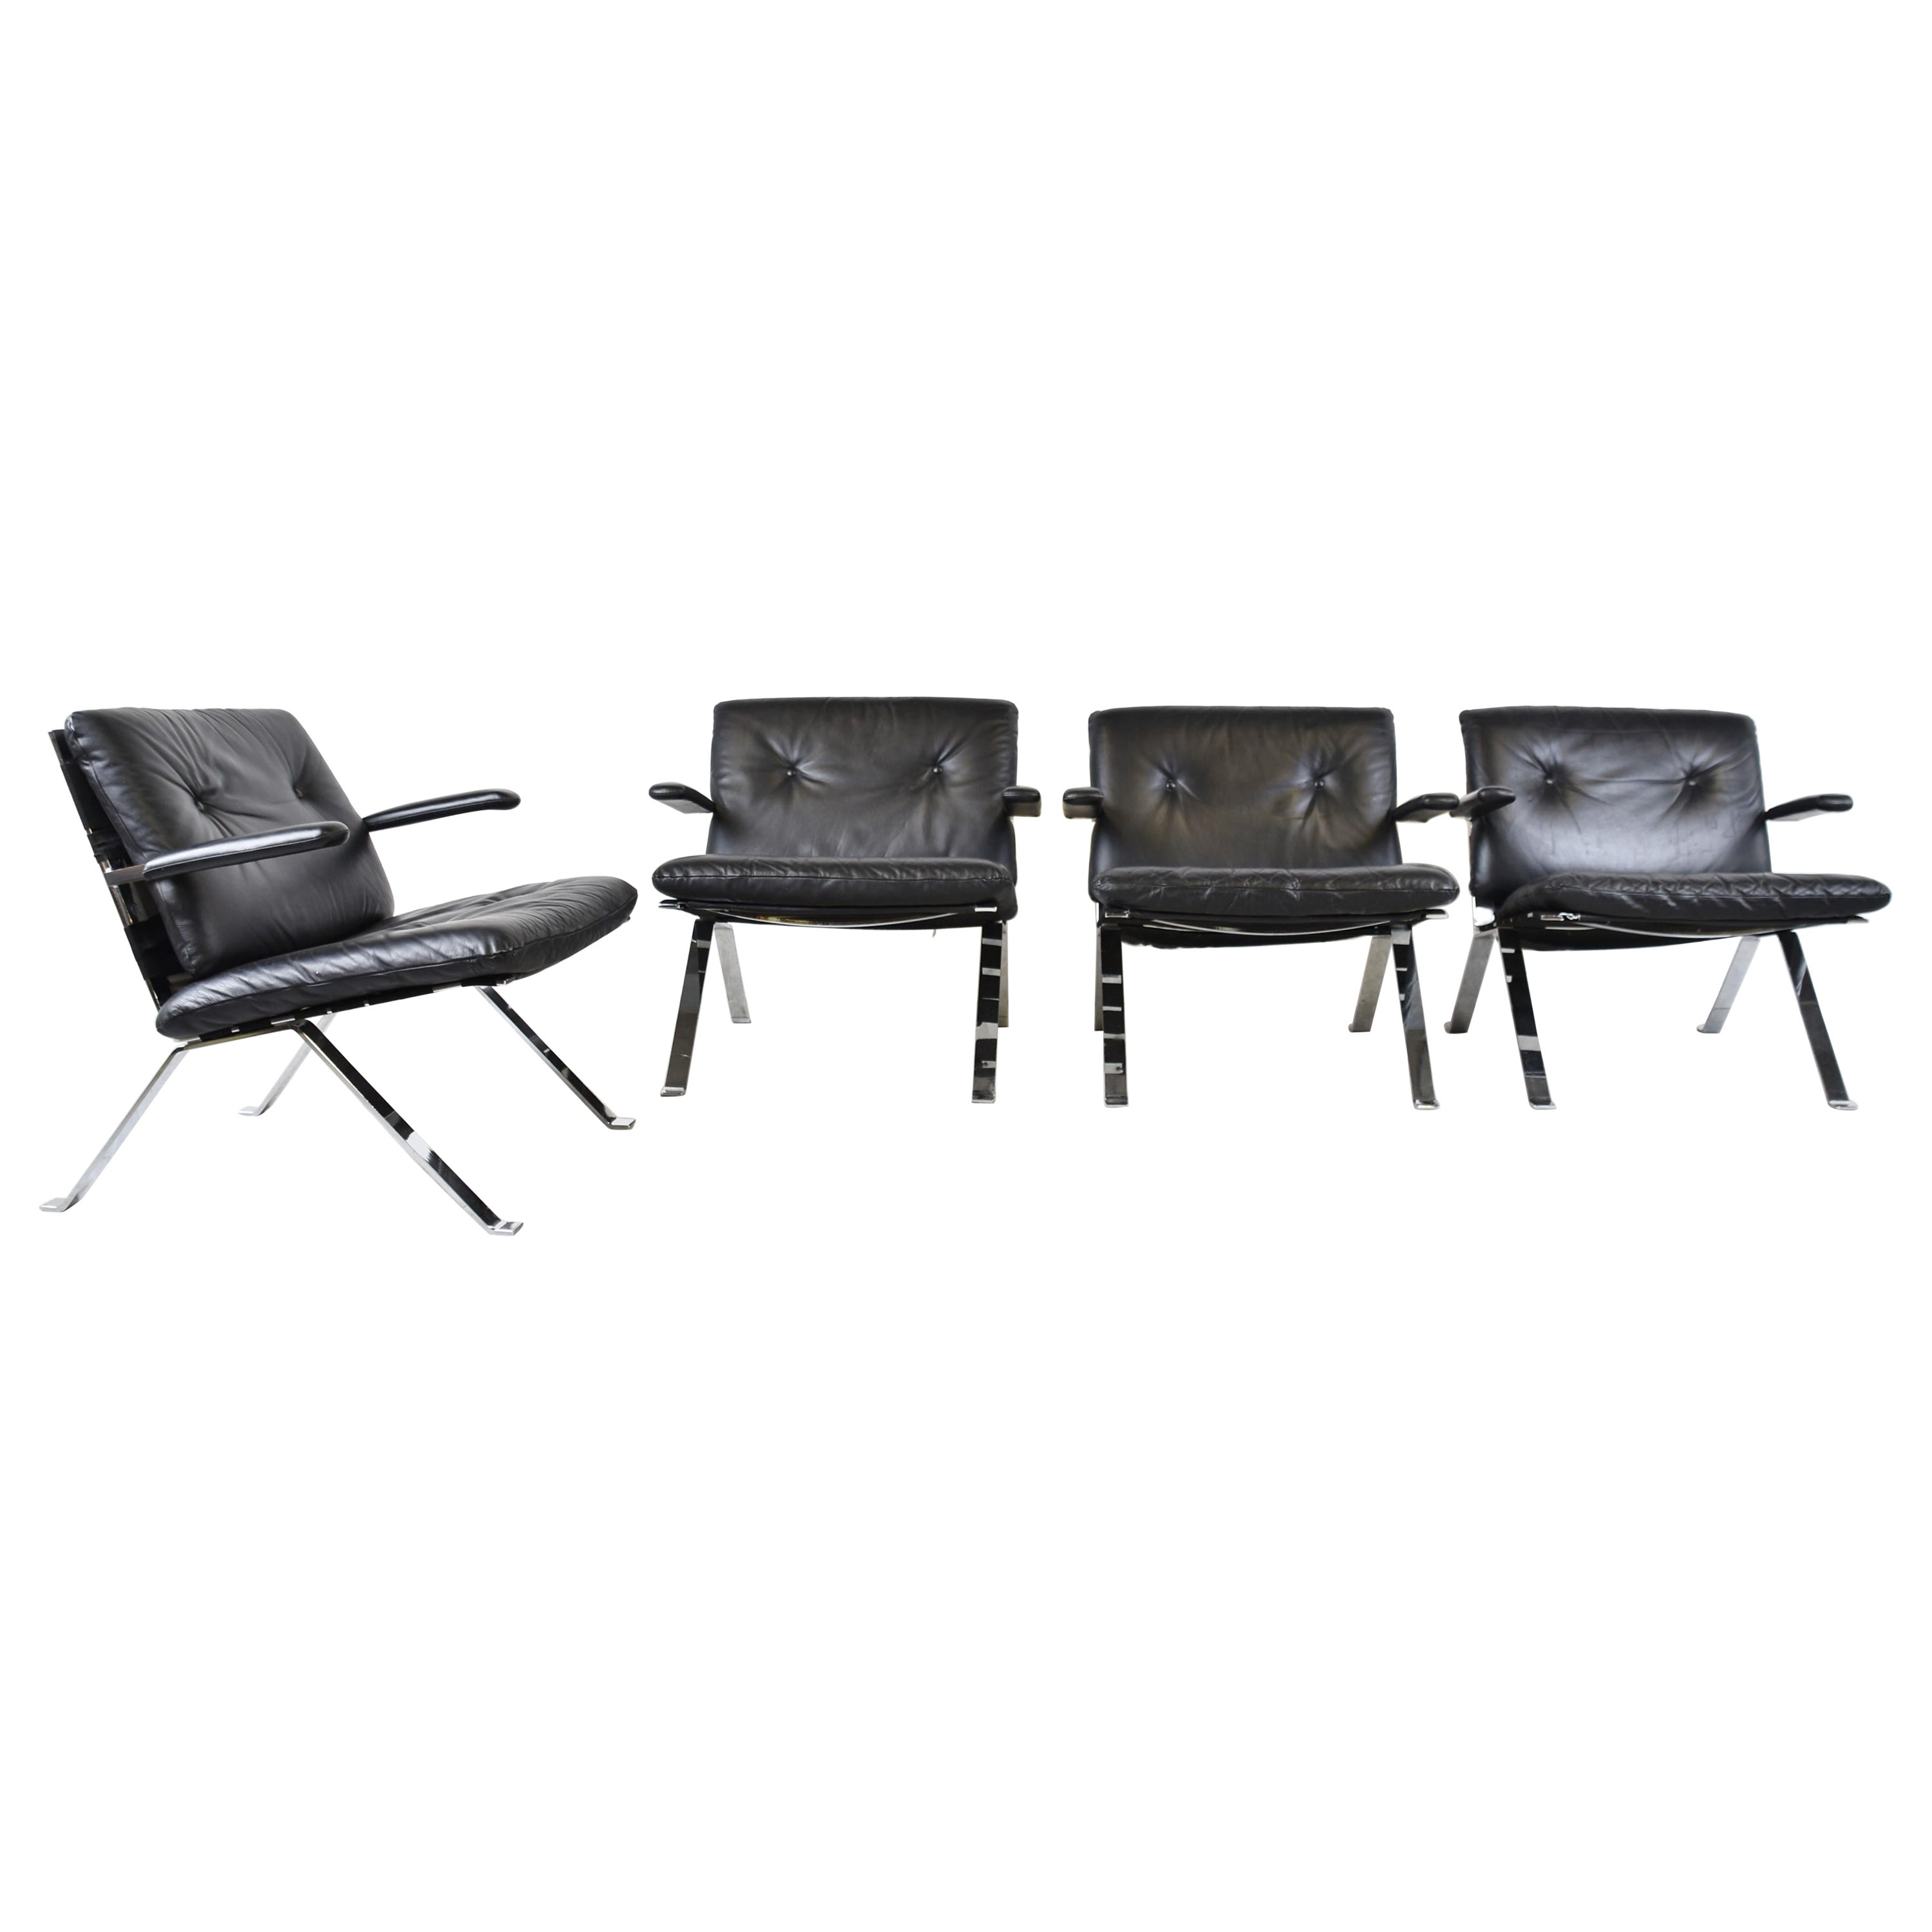 Set of 4 Leather Lounge Chairs Model 1600 by Hans Eichenberger for Girsberg